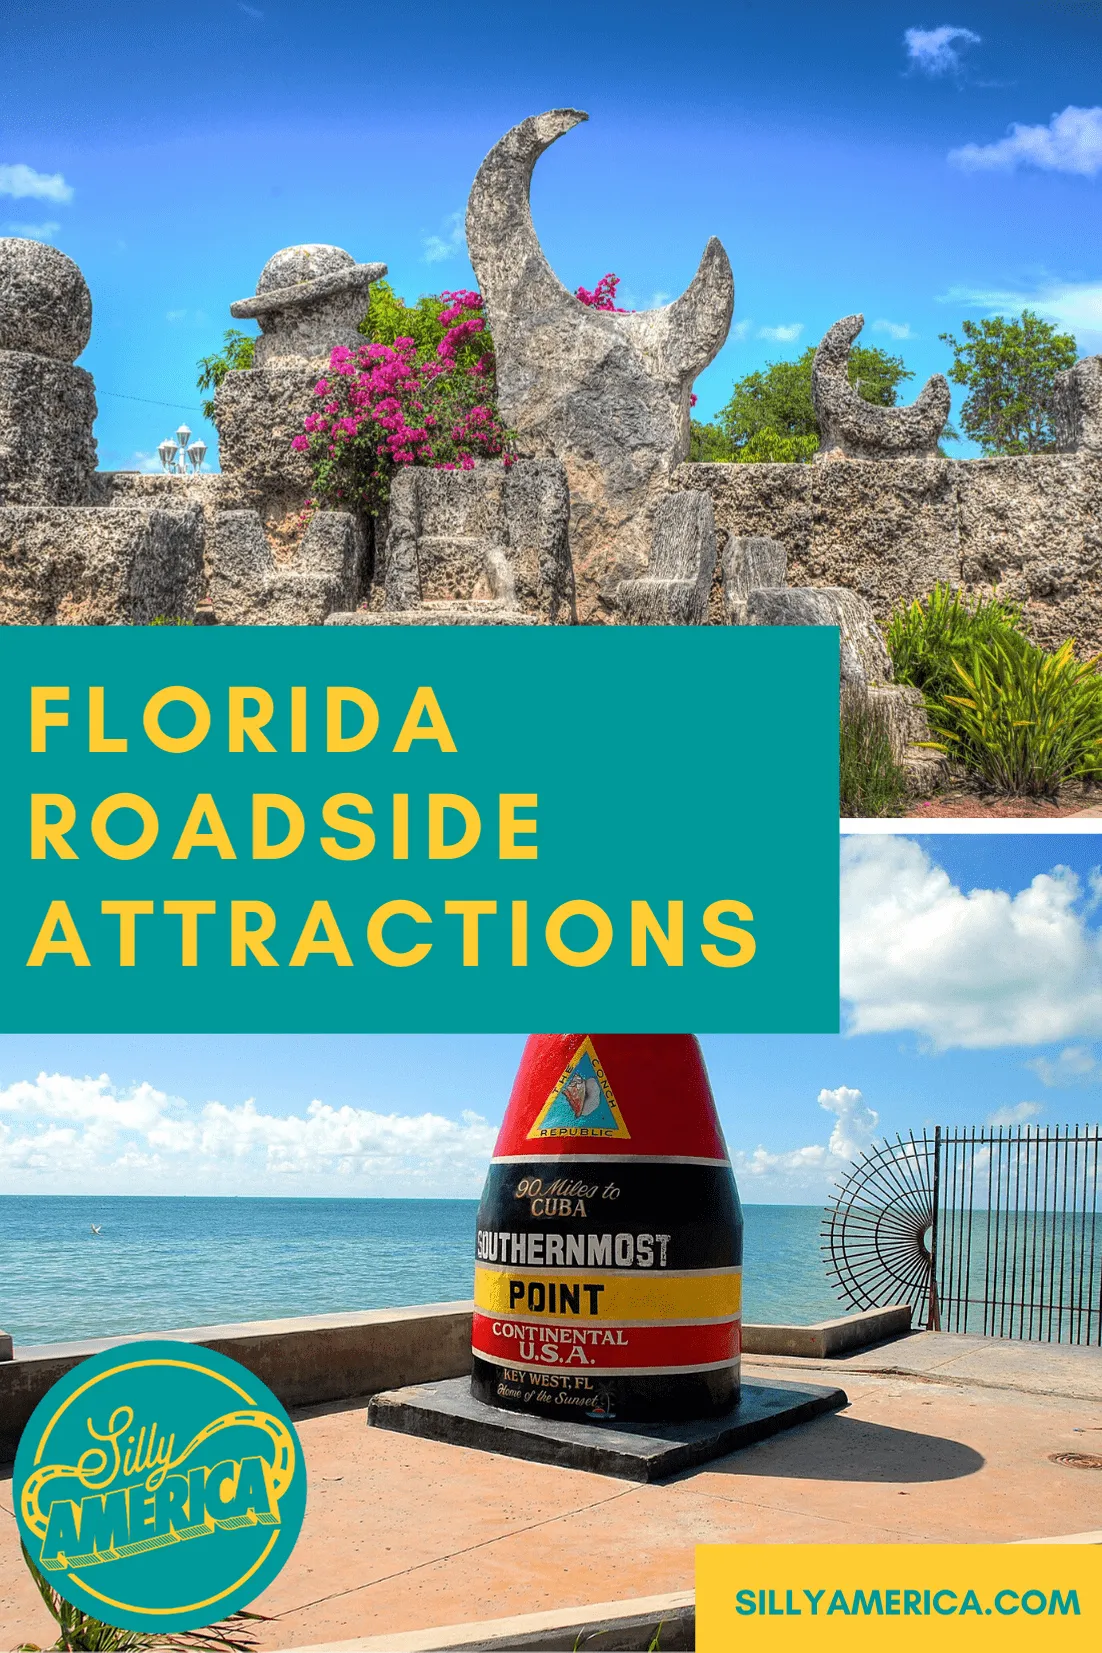 The best Florida roadside attractions to visit on a Florida road trip. Add these roadside oddities to your travel bucket list, itinerary, or route map! Weird roadside attractions and fun road trip stops for kids and adults on their way to Disney World and beyond.  #FloridaRoadsideAttractions #FloridaRoadTrip #Floridaroadtripdestinations #Floridaroadtripideas #Floridaroadtripitinerary #ThingstoDoinFlorida #Floridatraveldestinations #RoadsideAttraction #RoadsideAttraction #RoadTrip